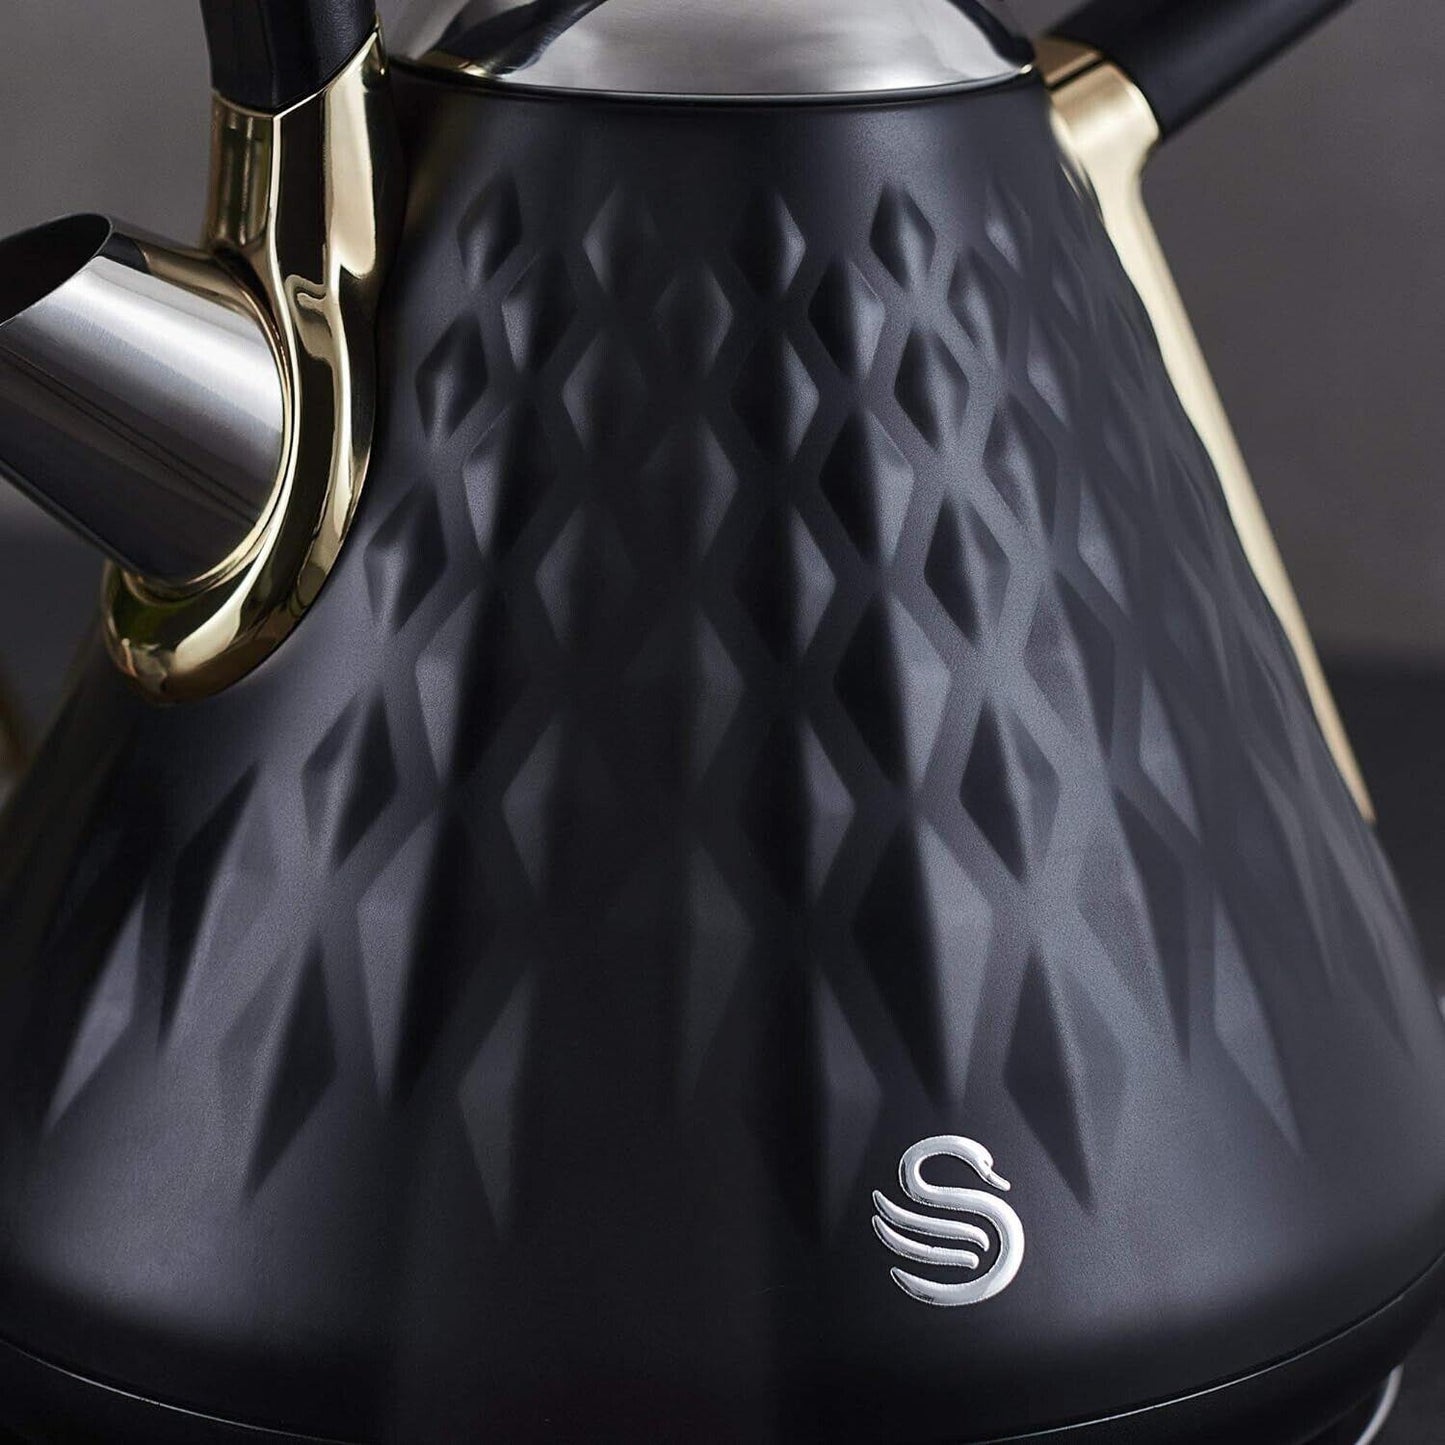 Swan Gatsby Black and Gold 1.7 Litre Pyramid Kettle, 3 KW Rapid Boil